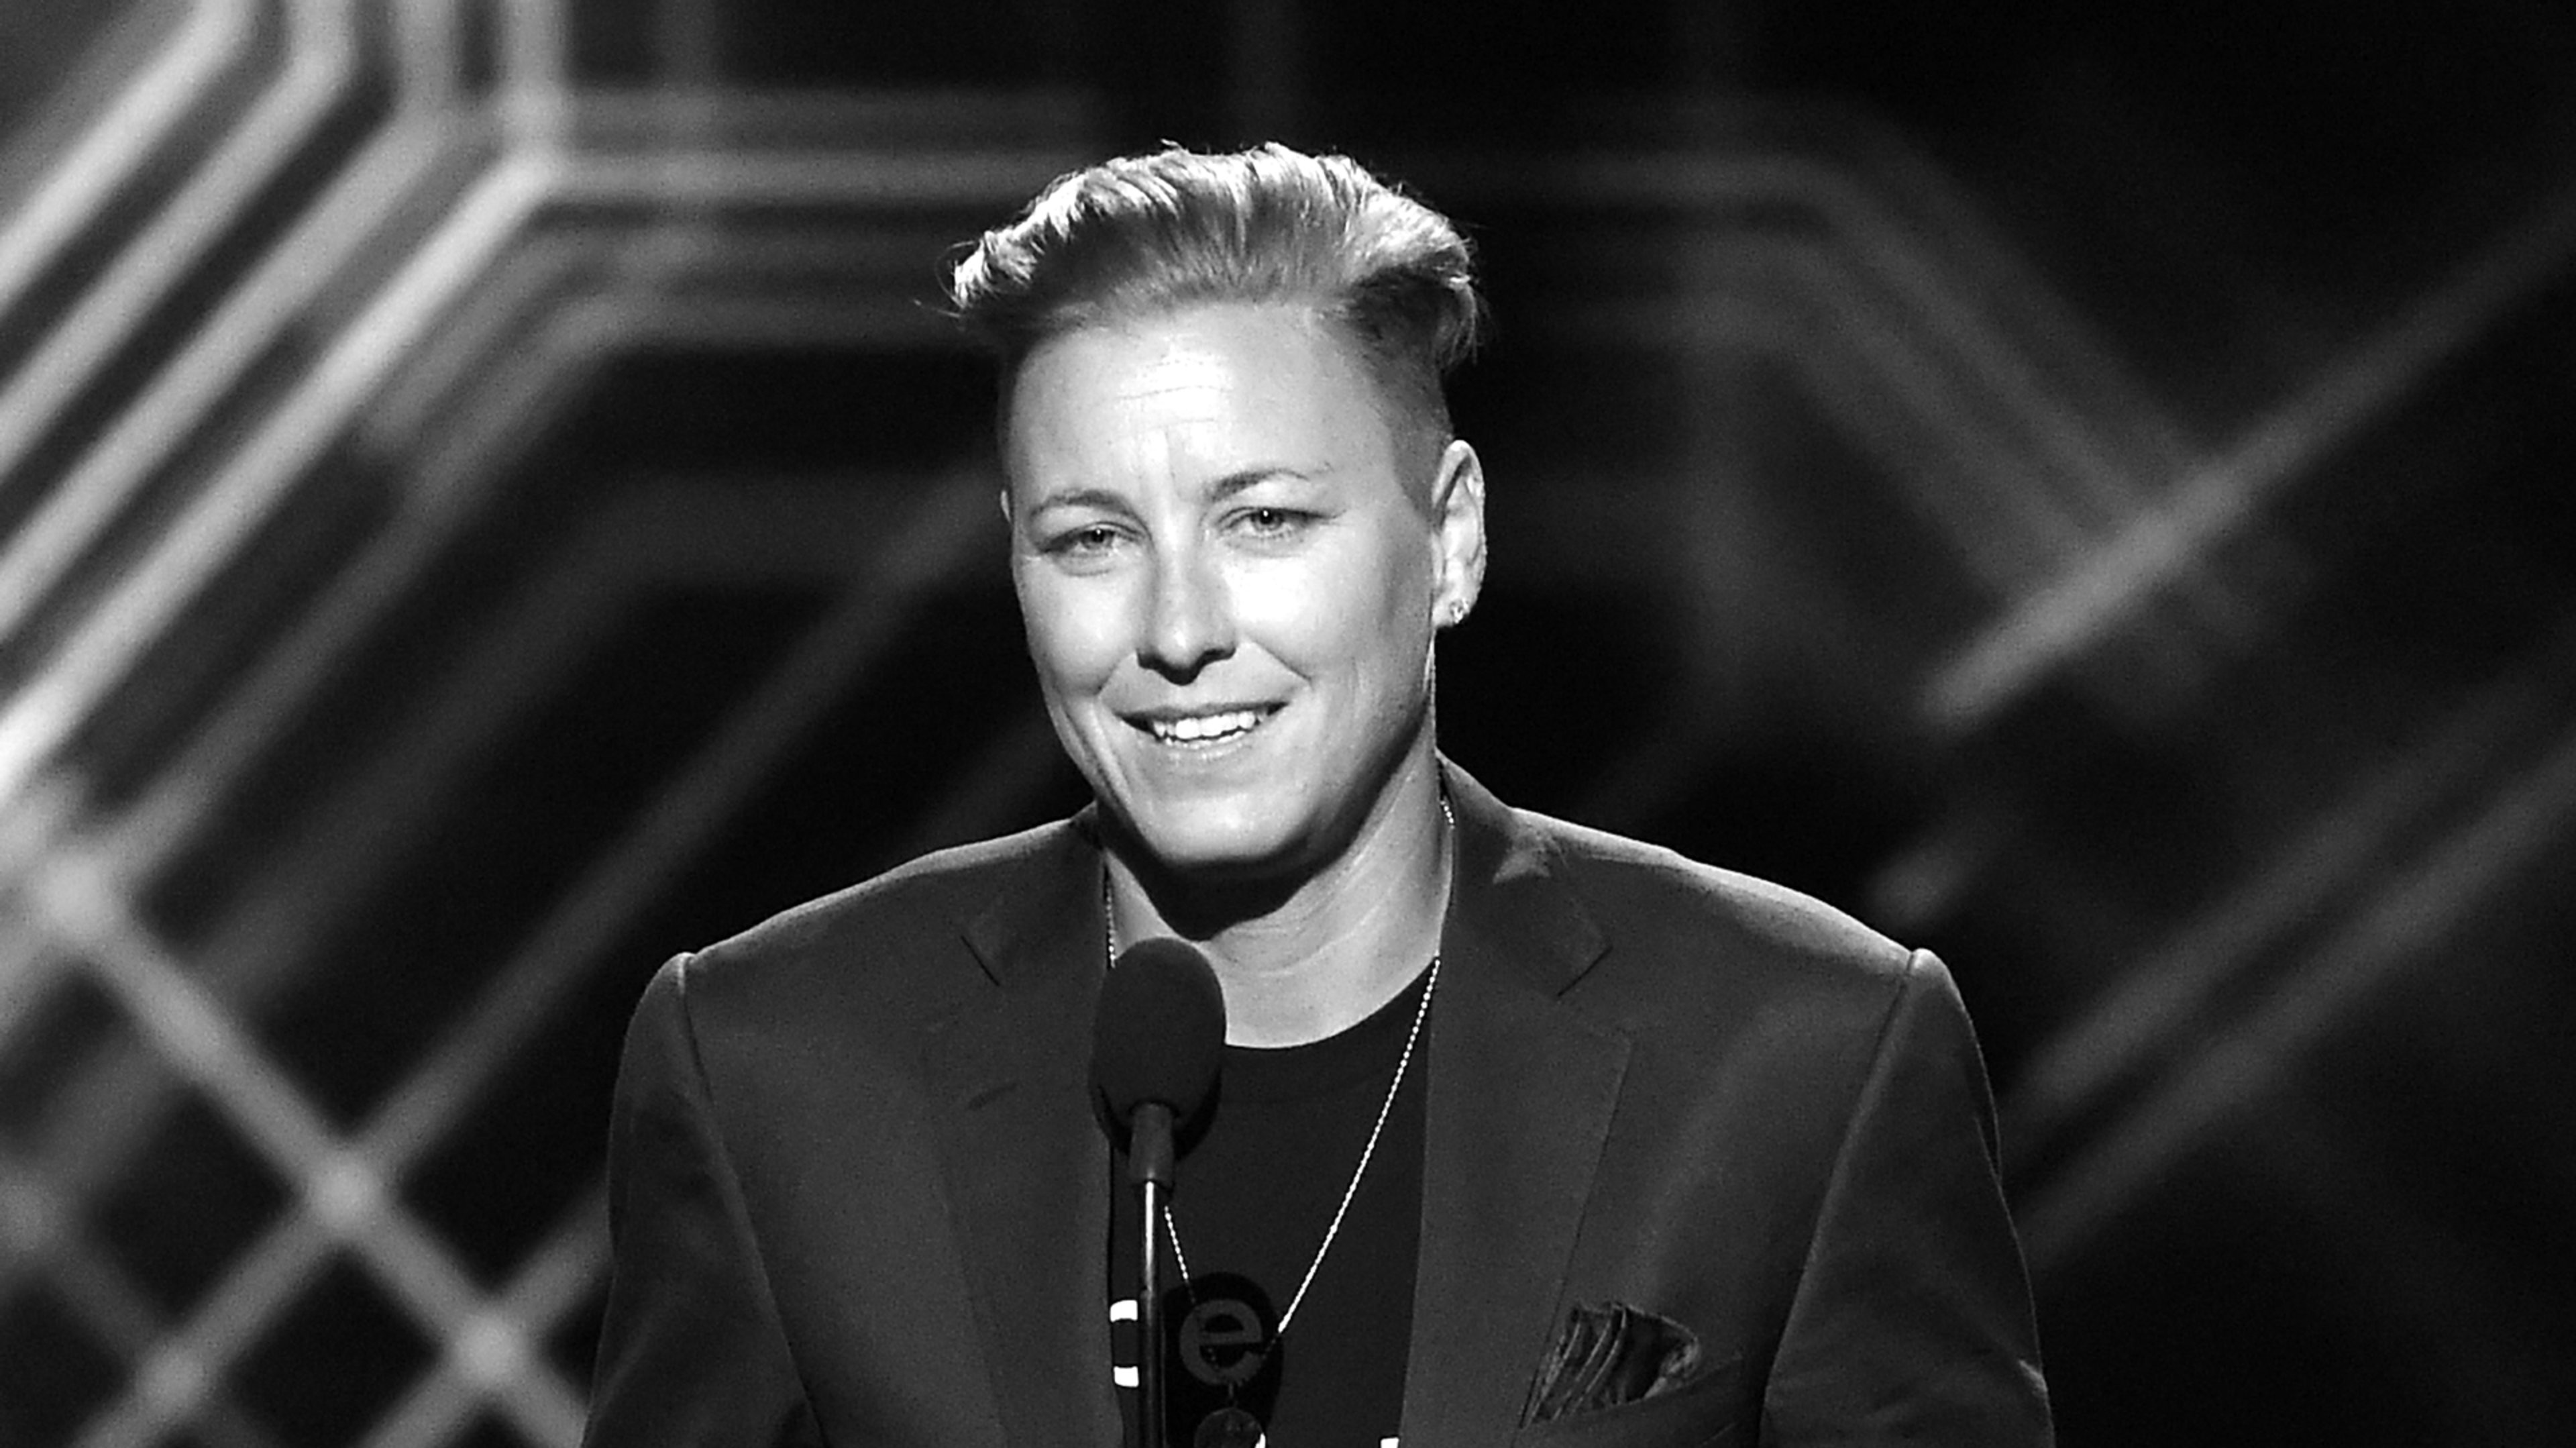 Watch: Soccer Star Abby Wambach And Hannah Jones Of Nike On Challenging The Status Quo